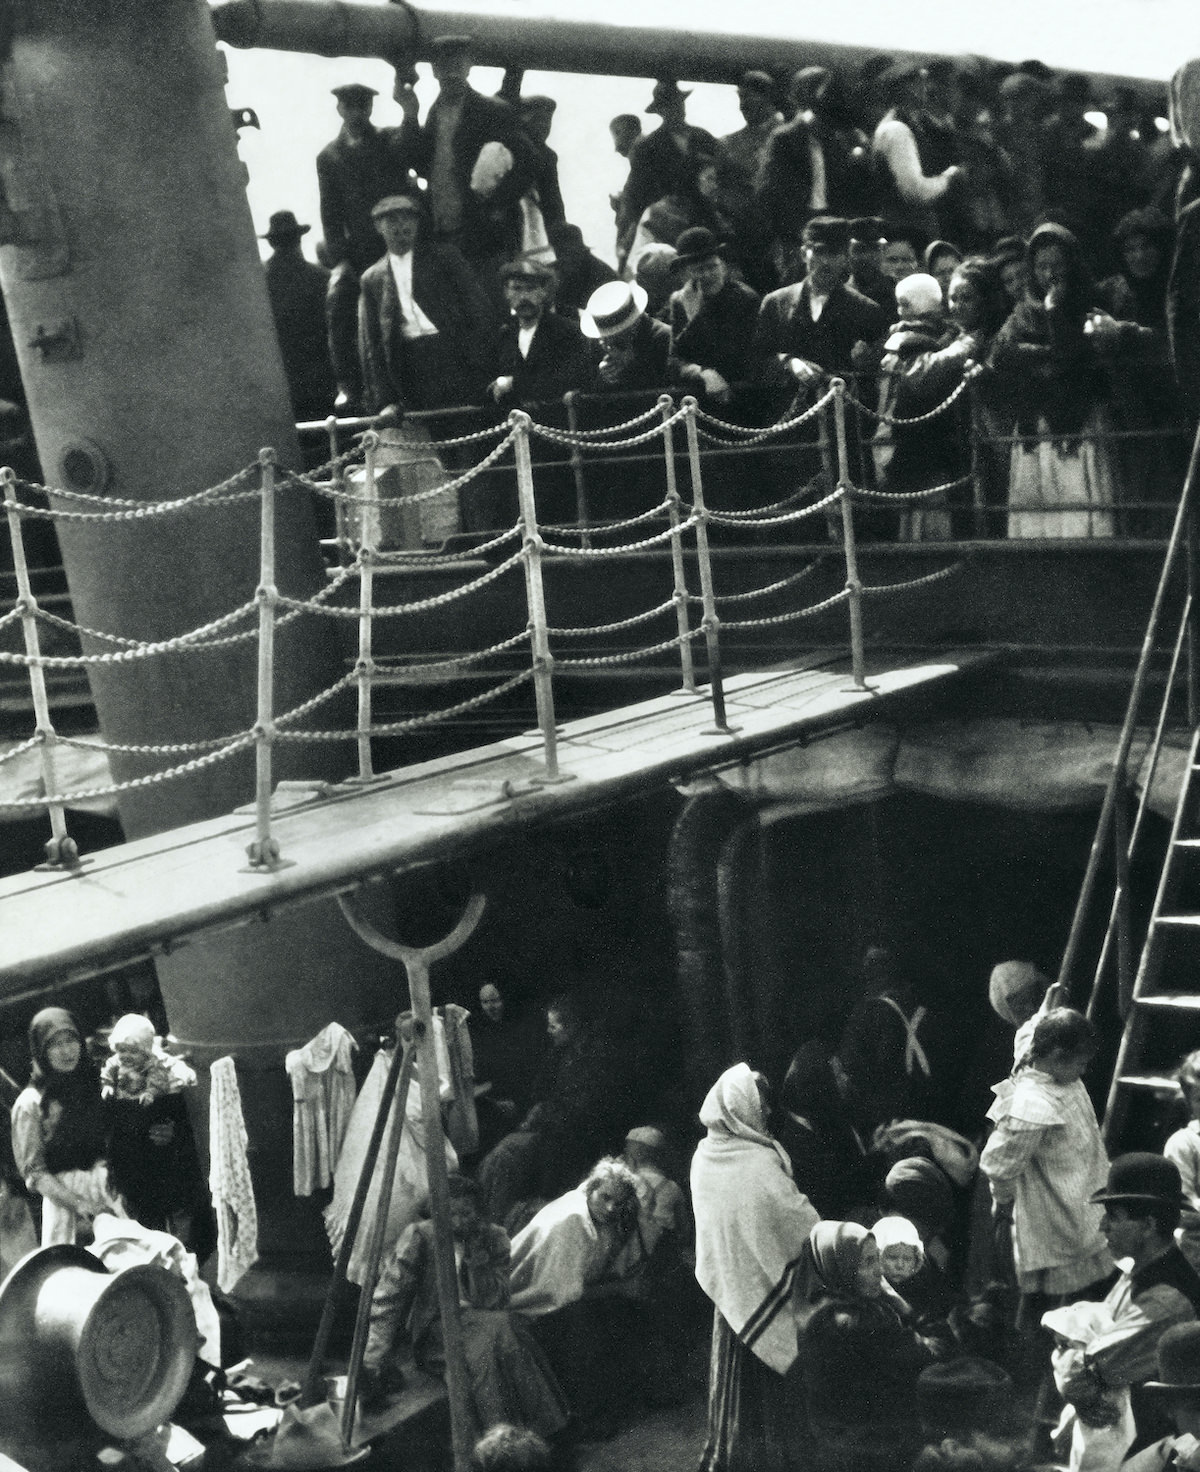 The Steerage, 1907